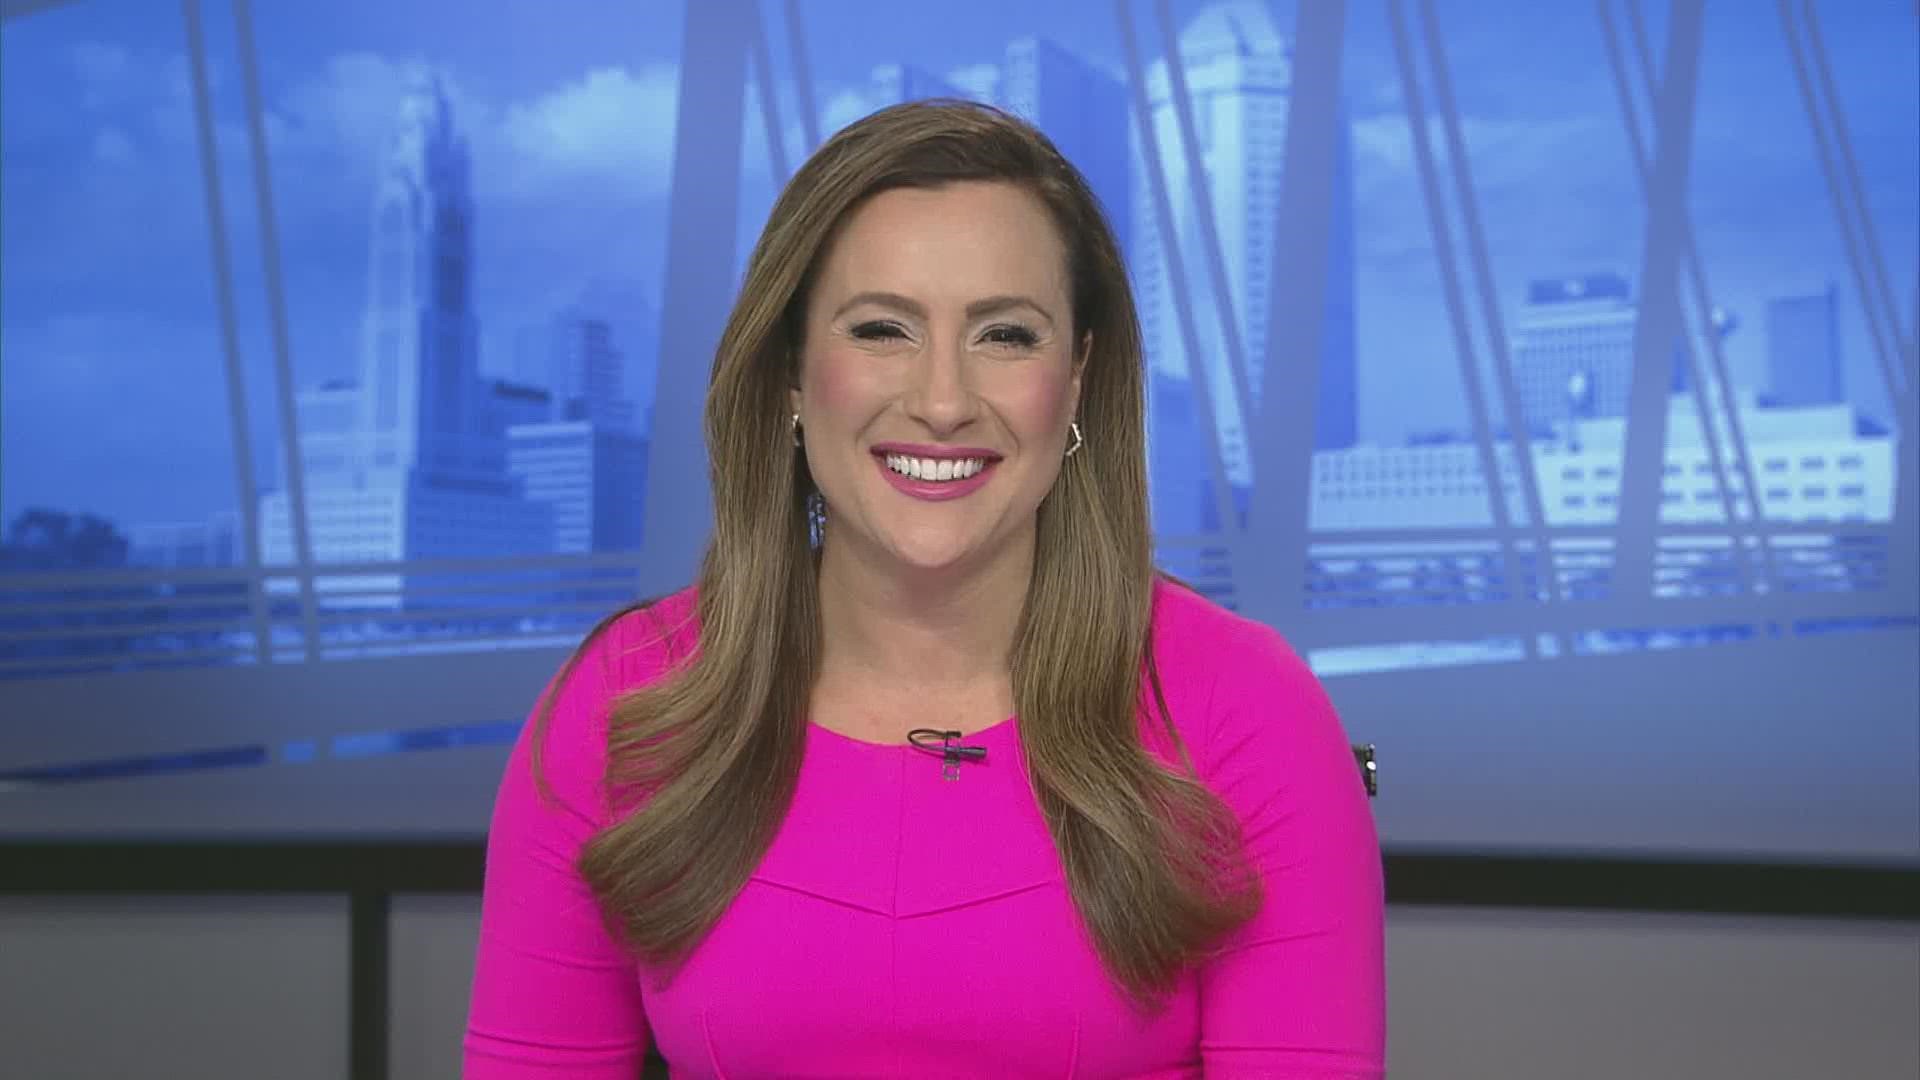 Karina Nova anchored her last newscast at WBNS-TV on Jan. 23, 2022 after spending more than 15 years at Central Ohio's News Leader.